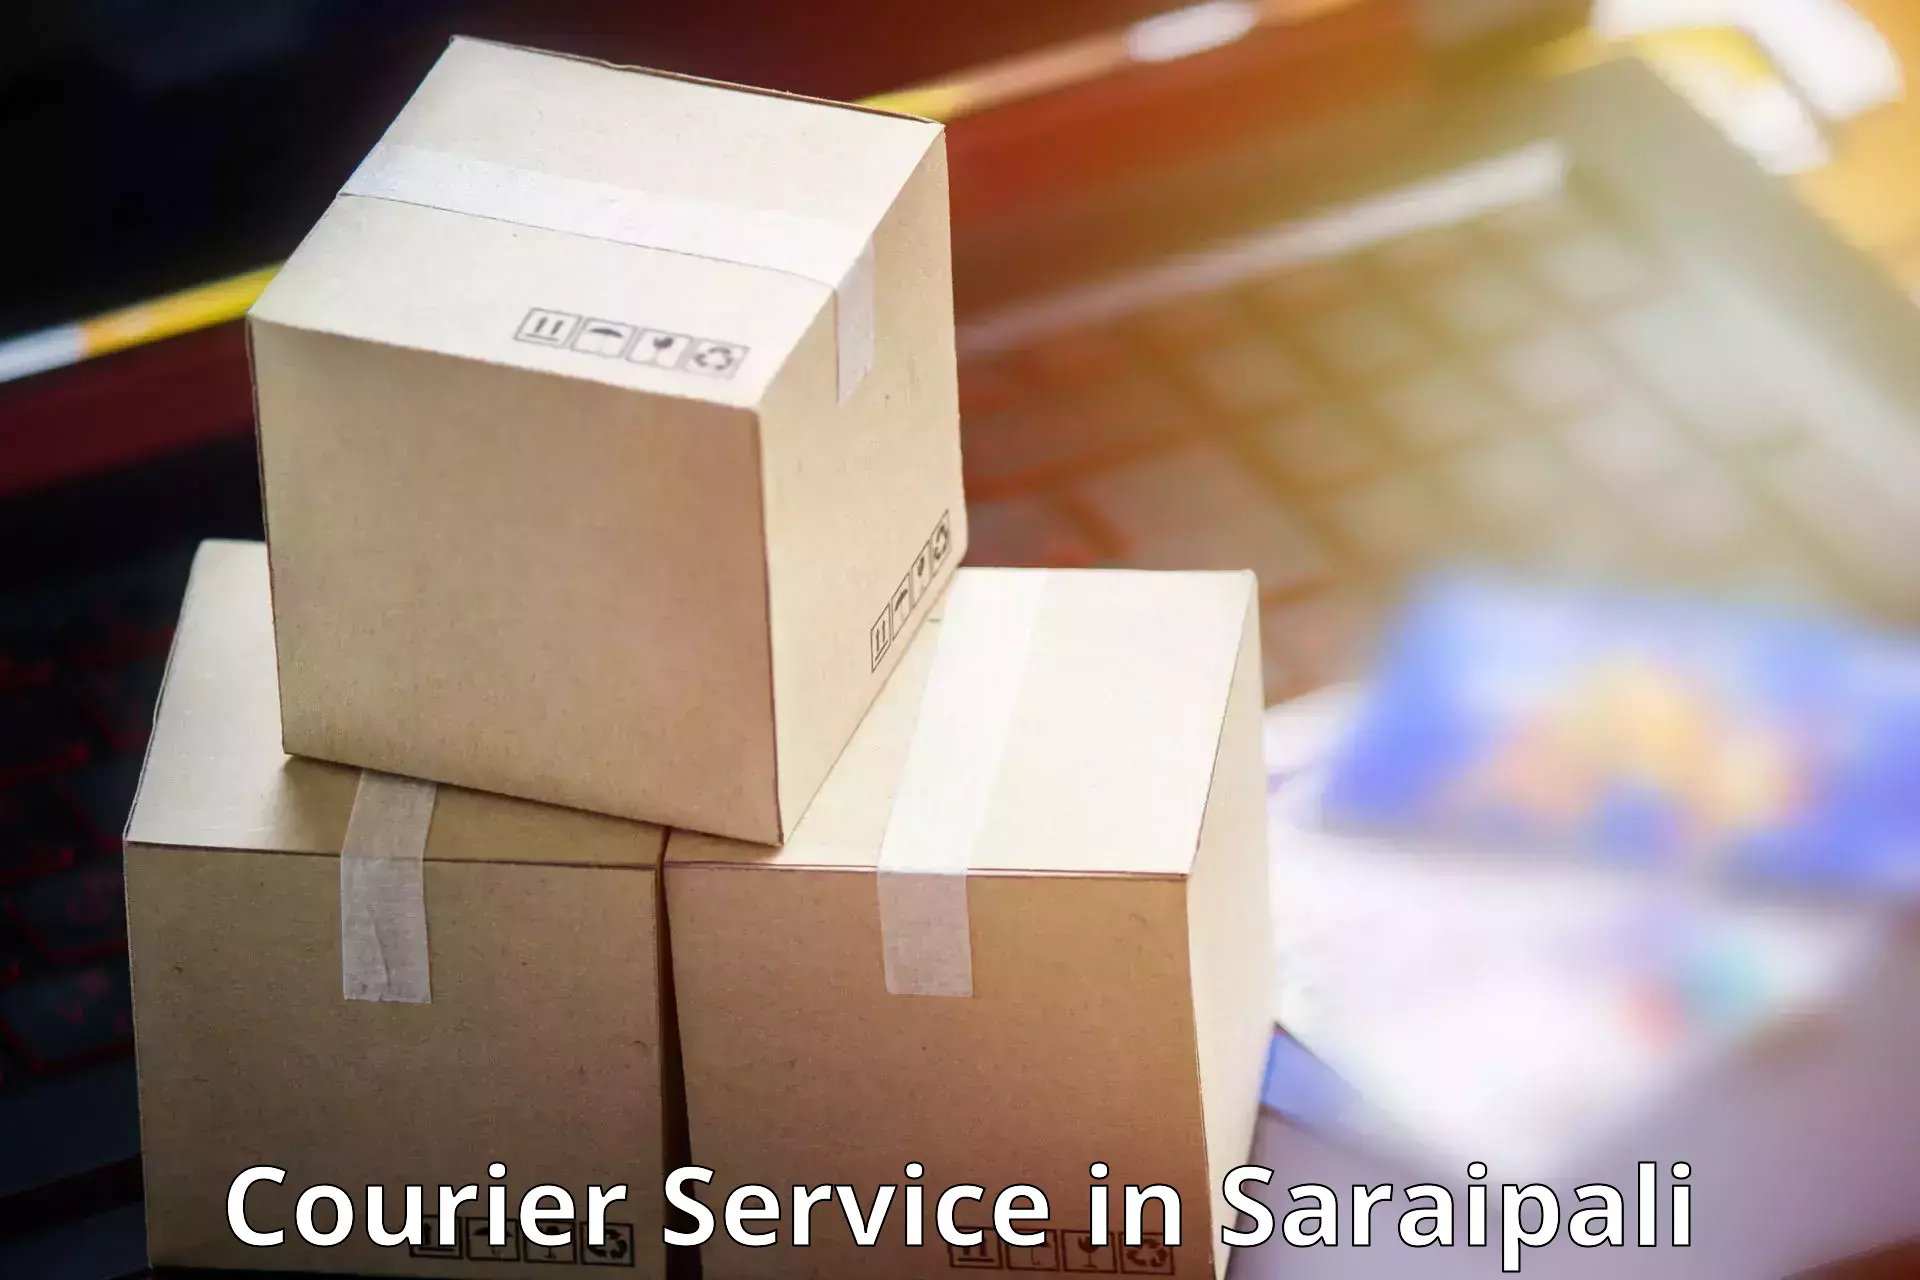 Trackable shipping service in Saraipali